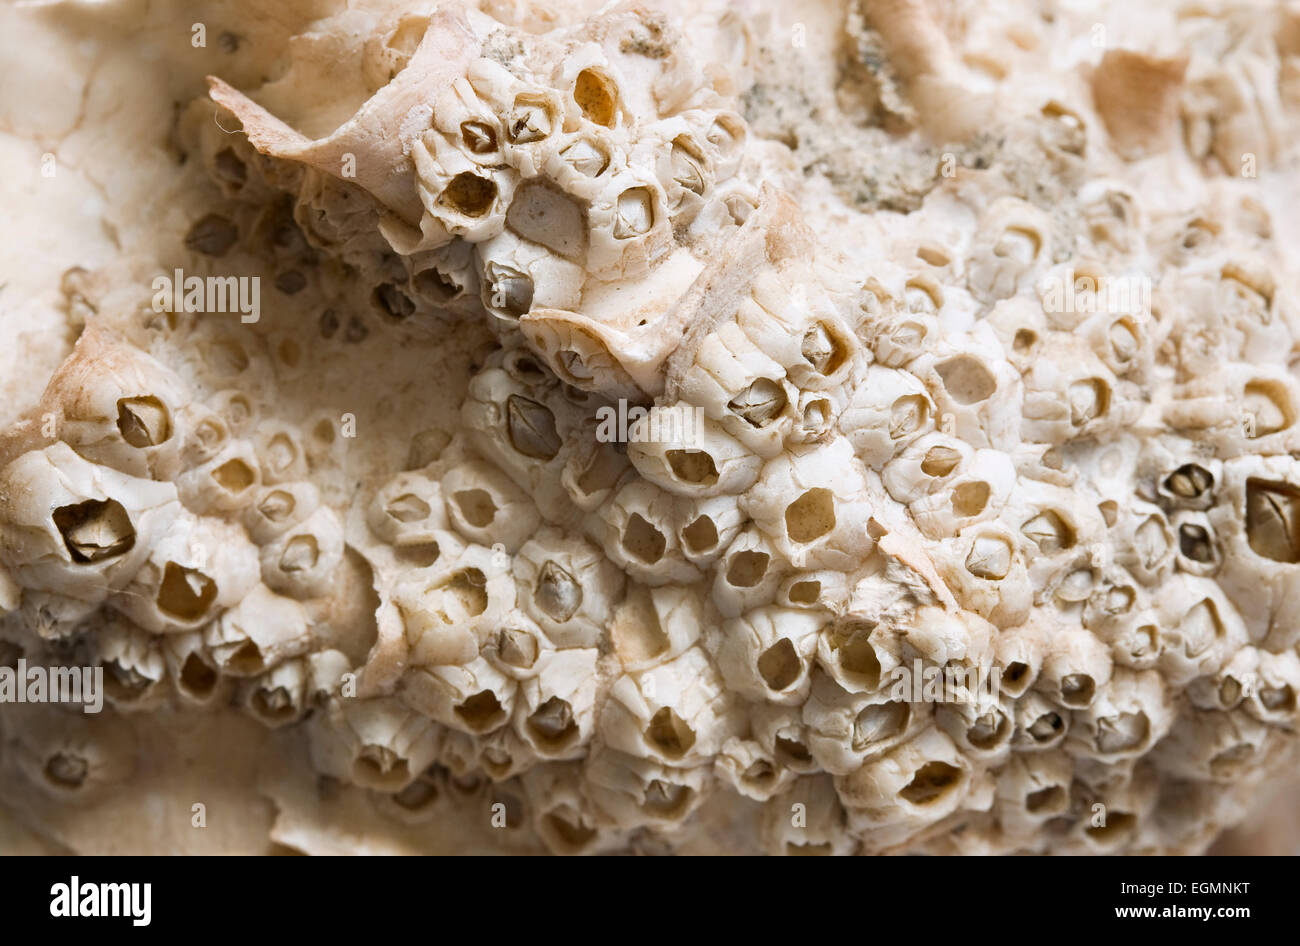 Shells from Balanus crenatus on an oyster shell. Can be used as background Stock Photo